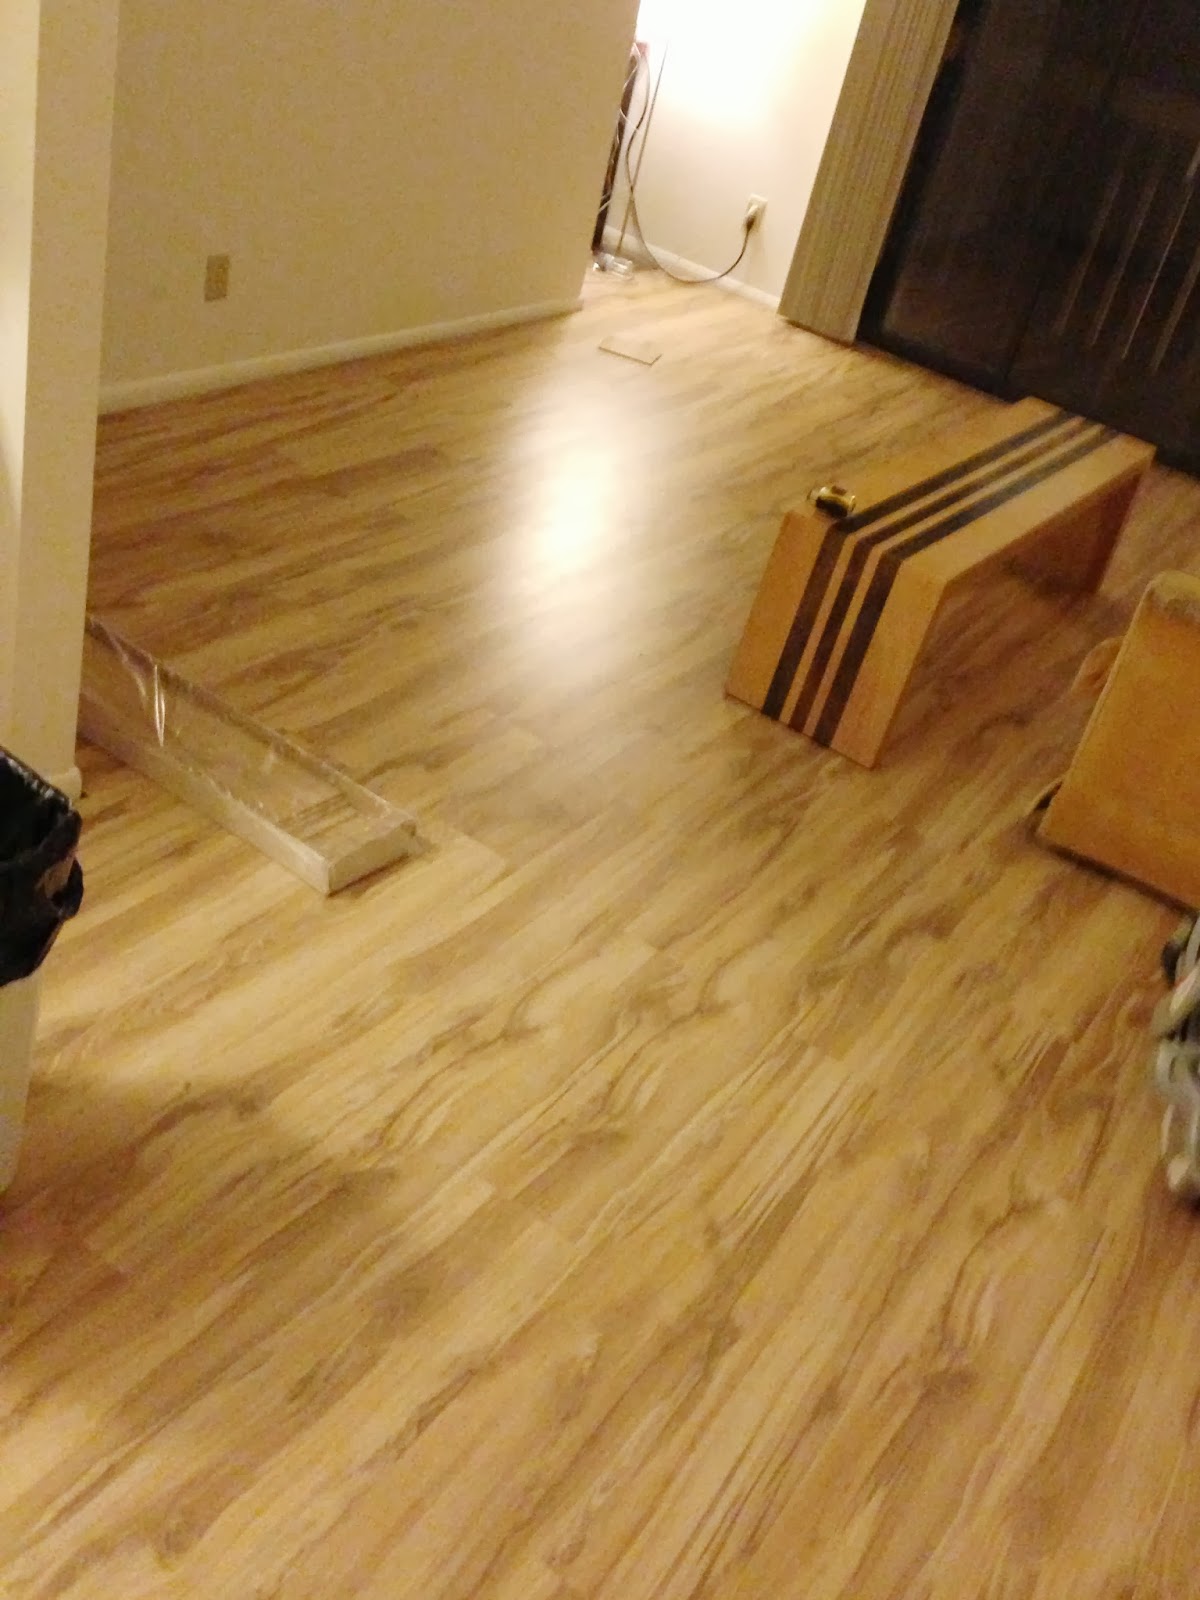 How We Put Hardwood Over Carpet Messymom, Can You Put Laminate Flooring Over Top Of Carpet